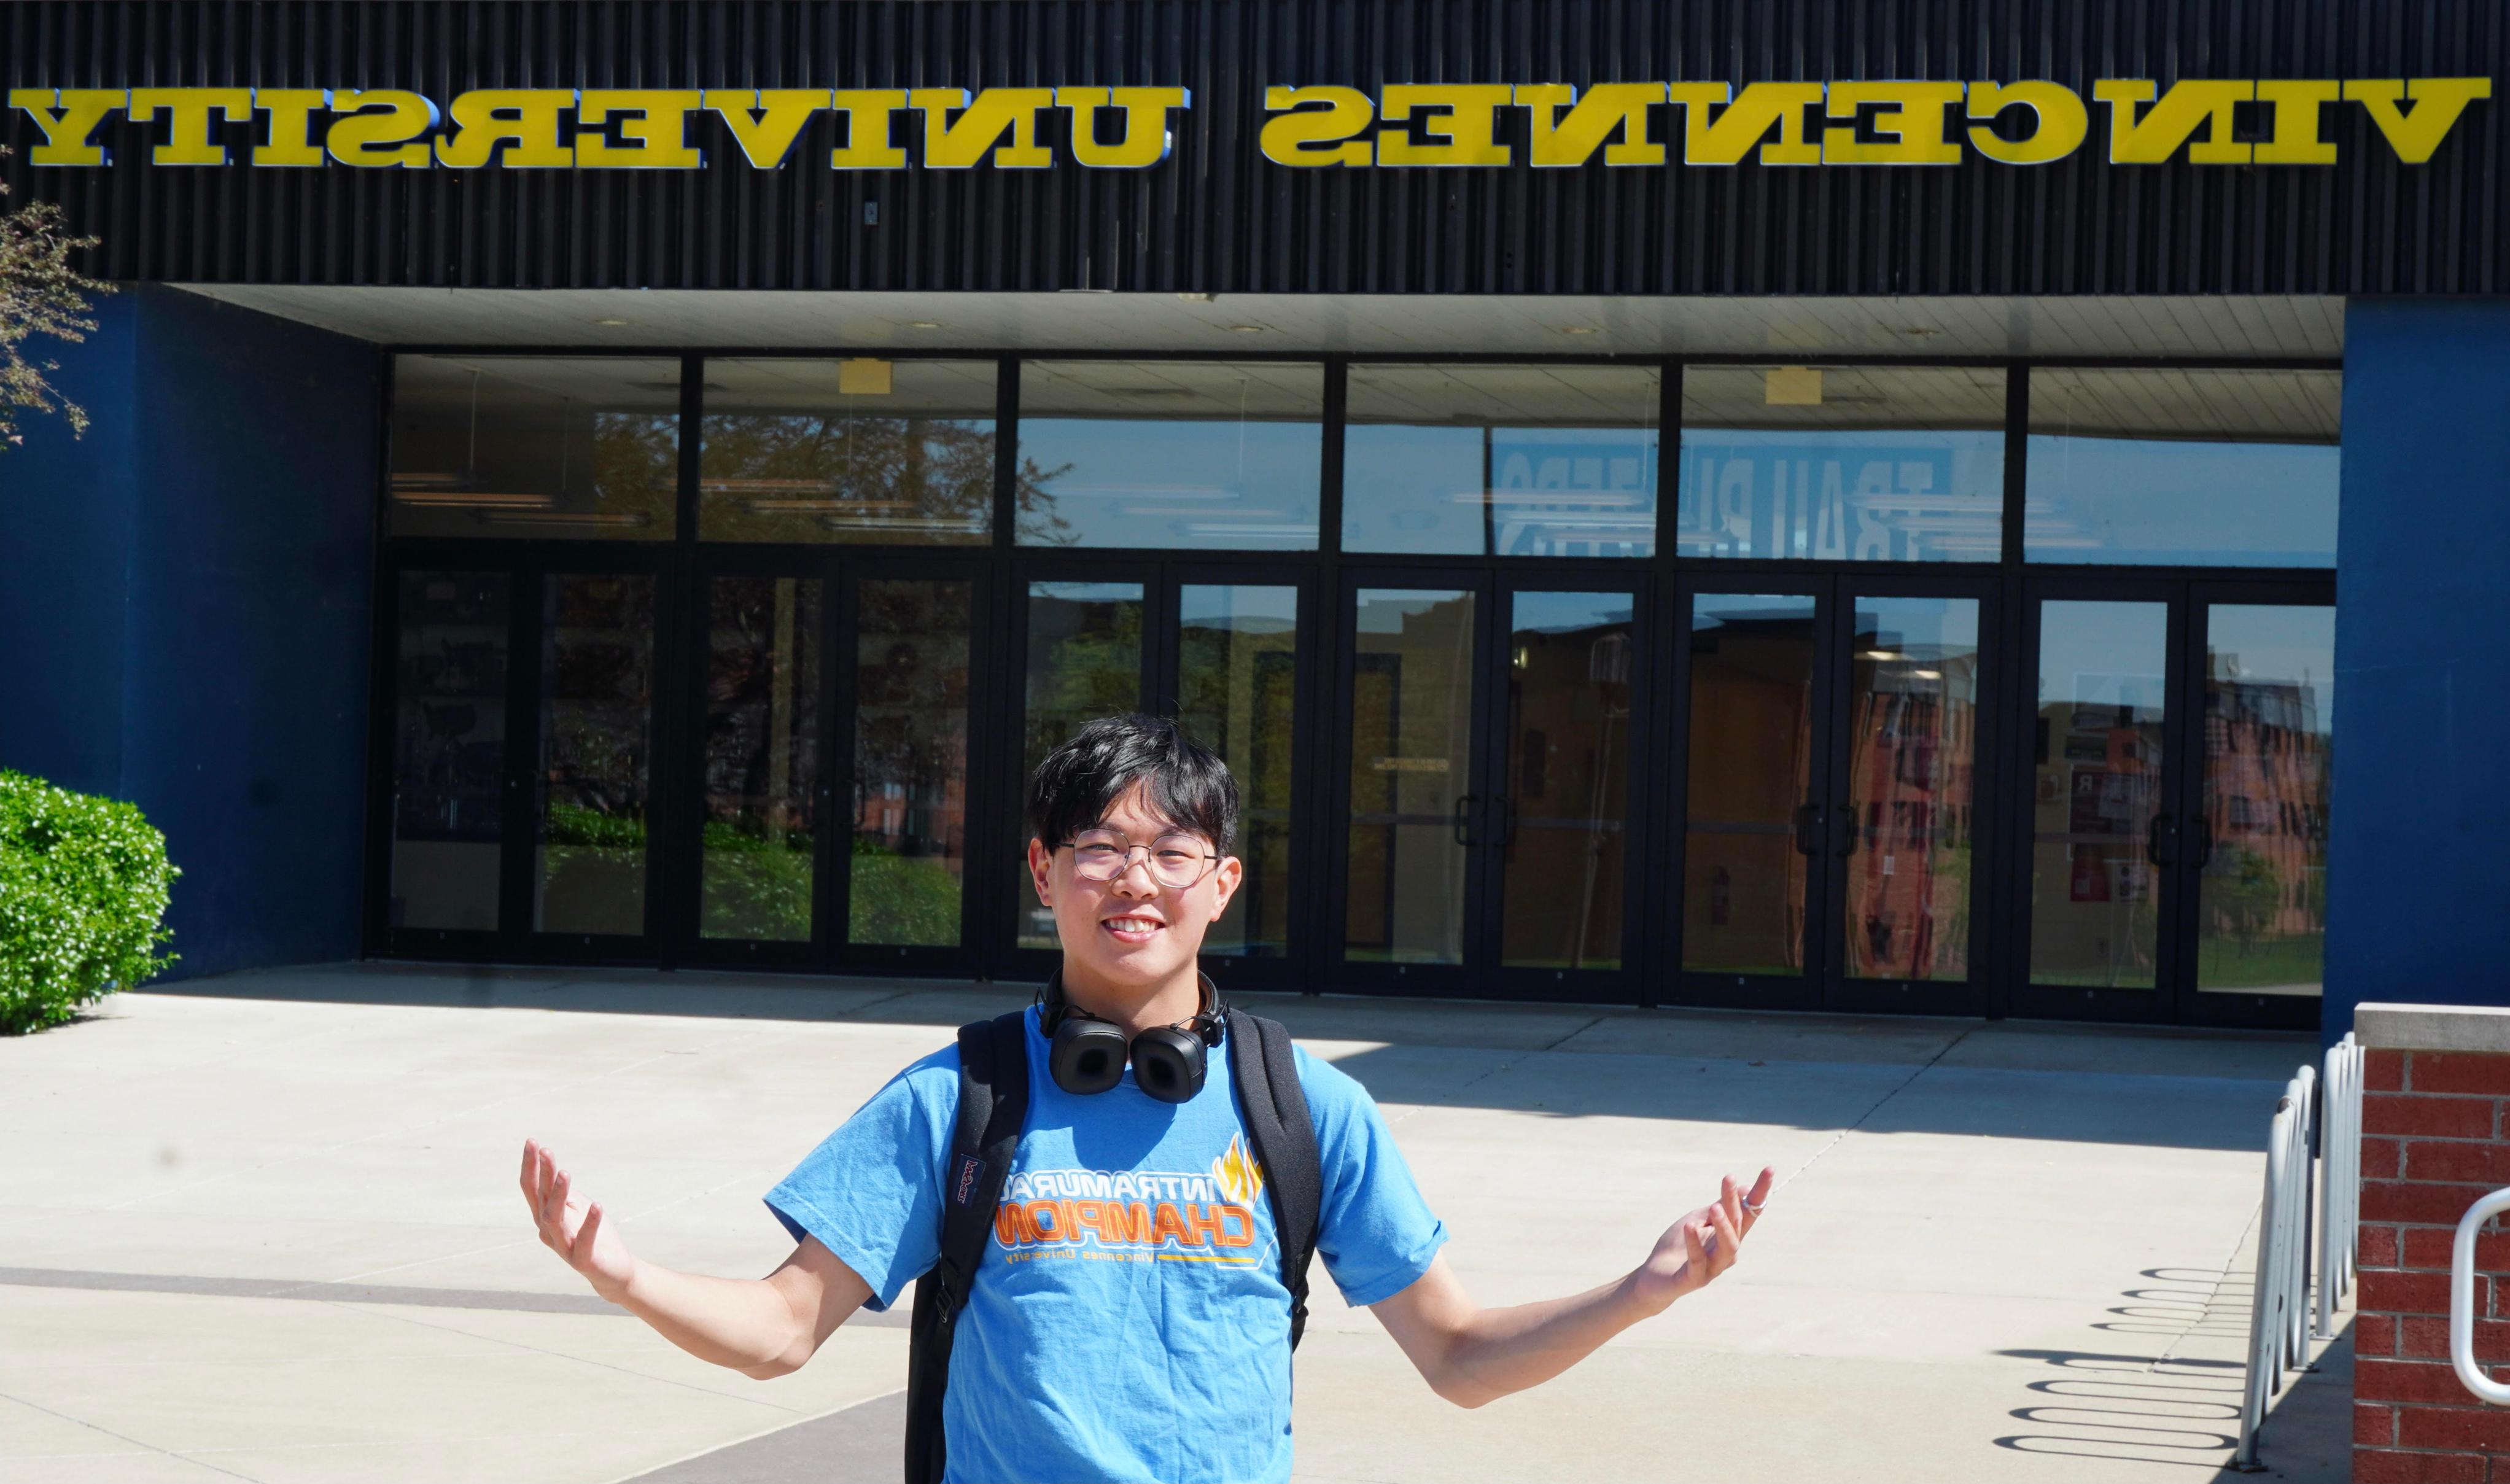 Samuel Lo stands with his arms extended in front of an entrance to the P.E. Complex. Vincennes University is displaced over the doors.er 